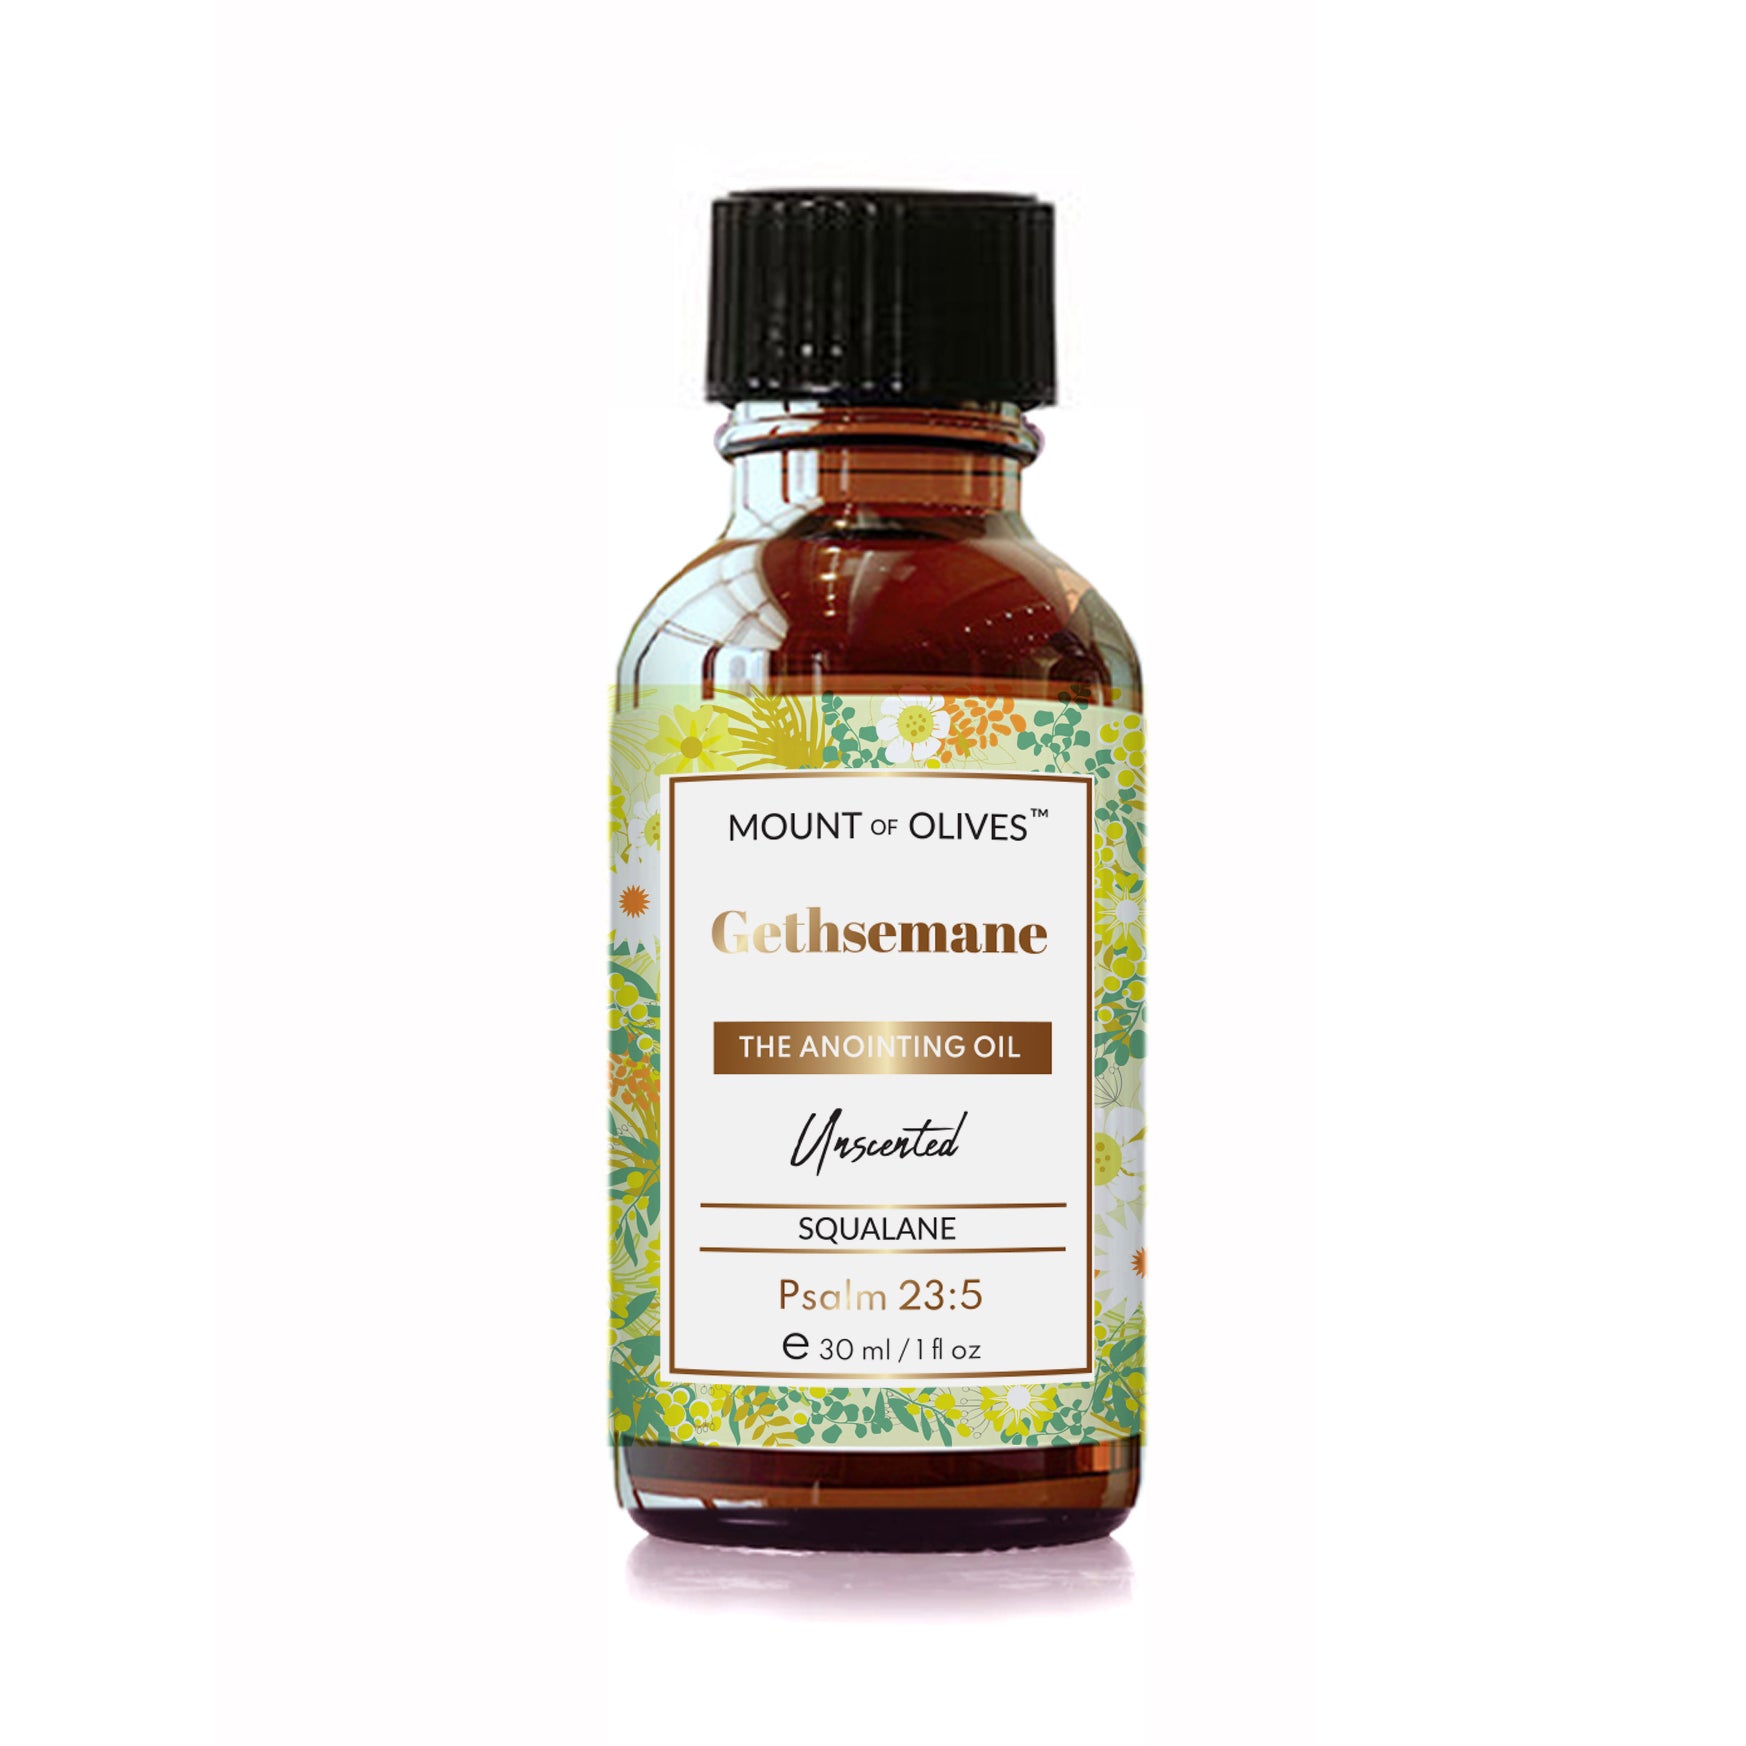 Gethsemane Anointing Oil (Unscented) With Cosmeceuticals Derived from Biblical Botanicals